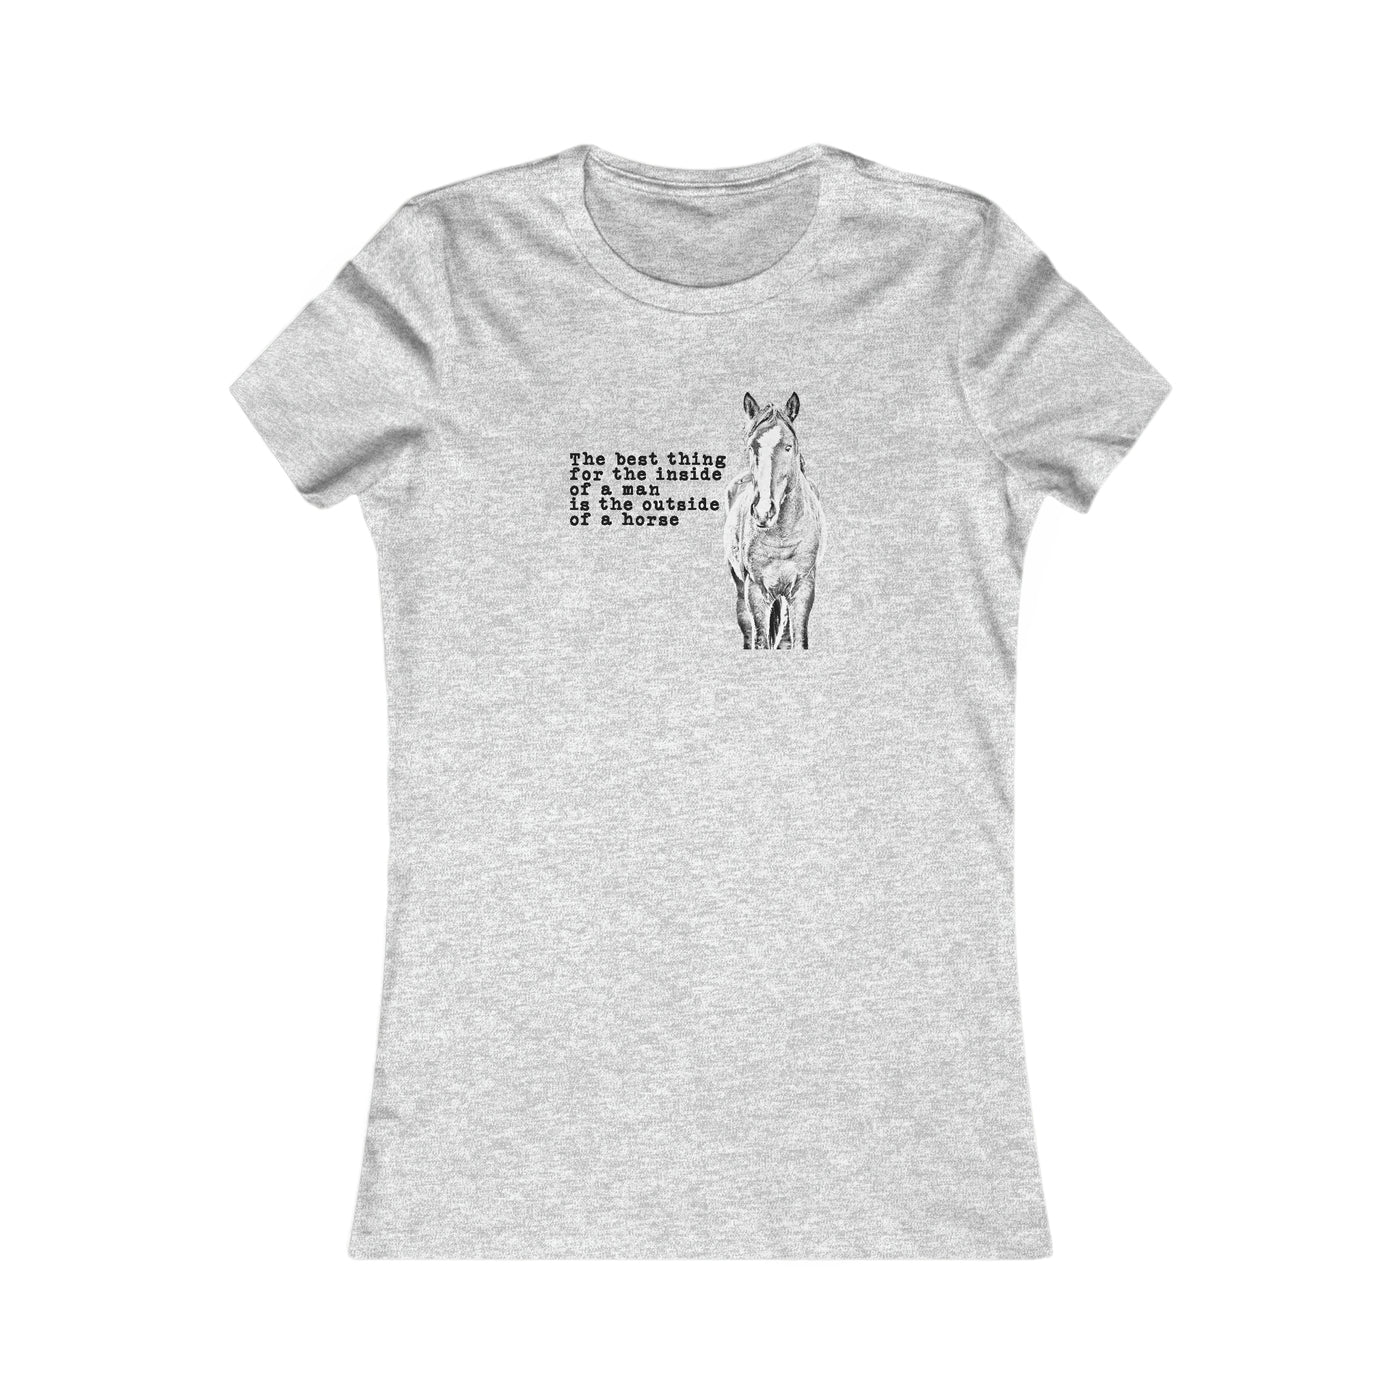 The Best Thing For The Inside Of A Man Is The Outside Of A Horse Women's Favorite Tee